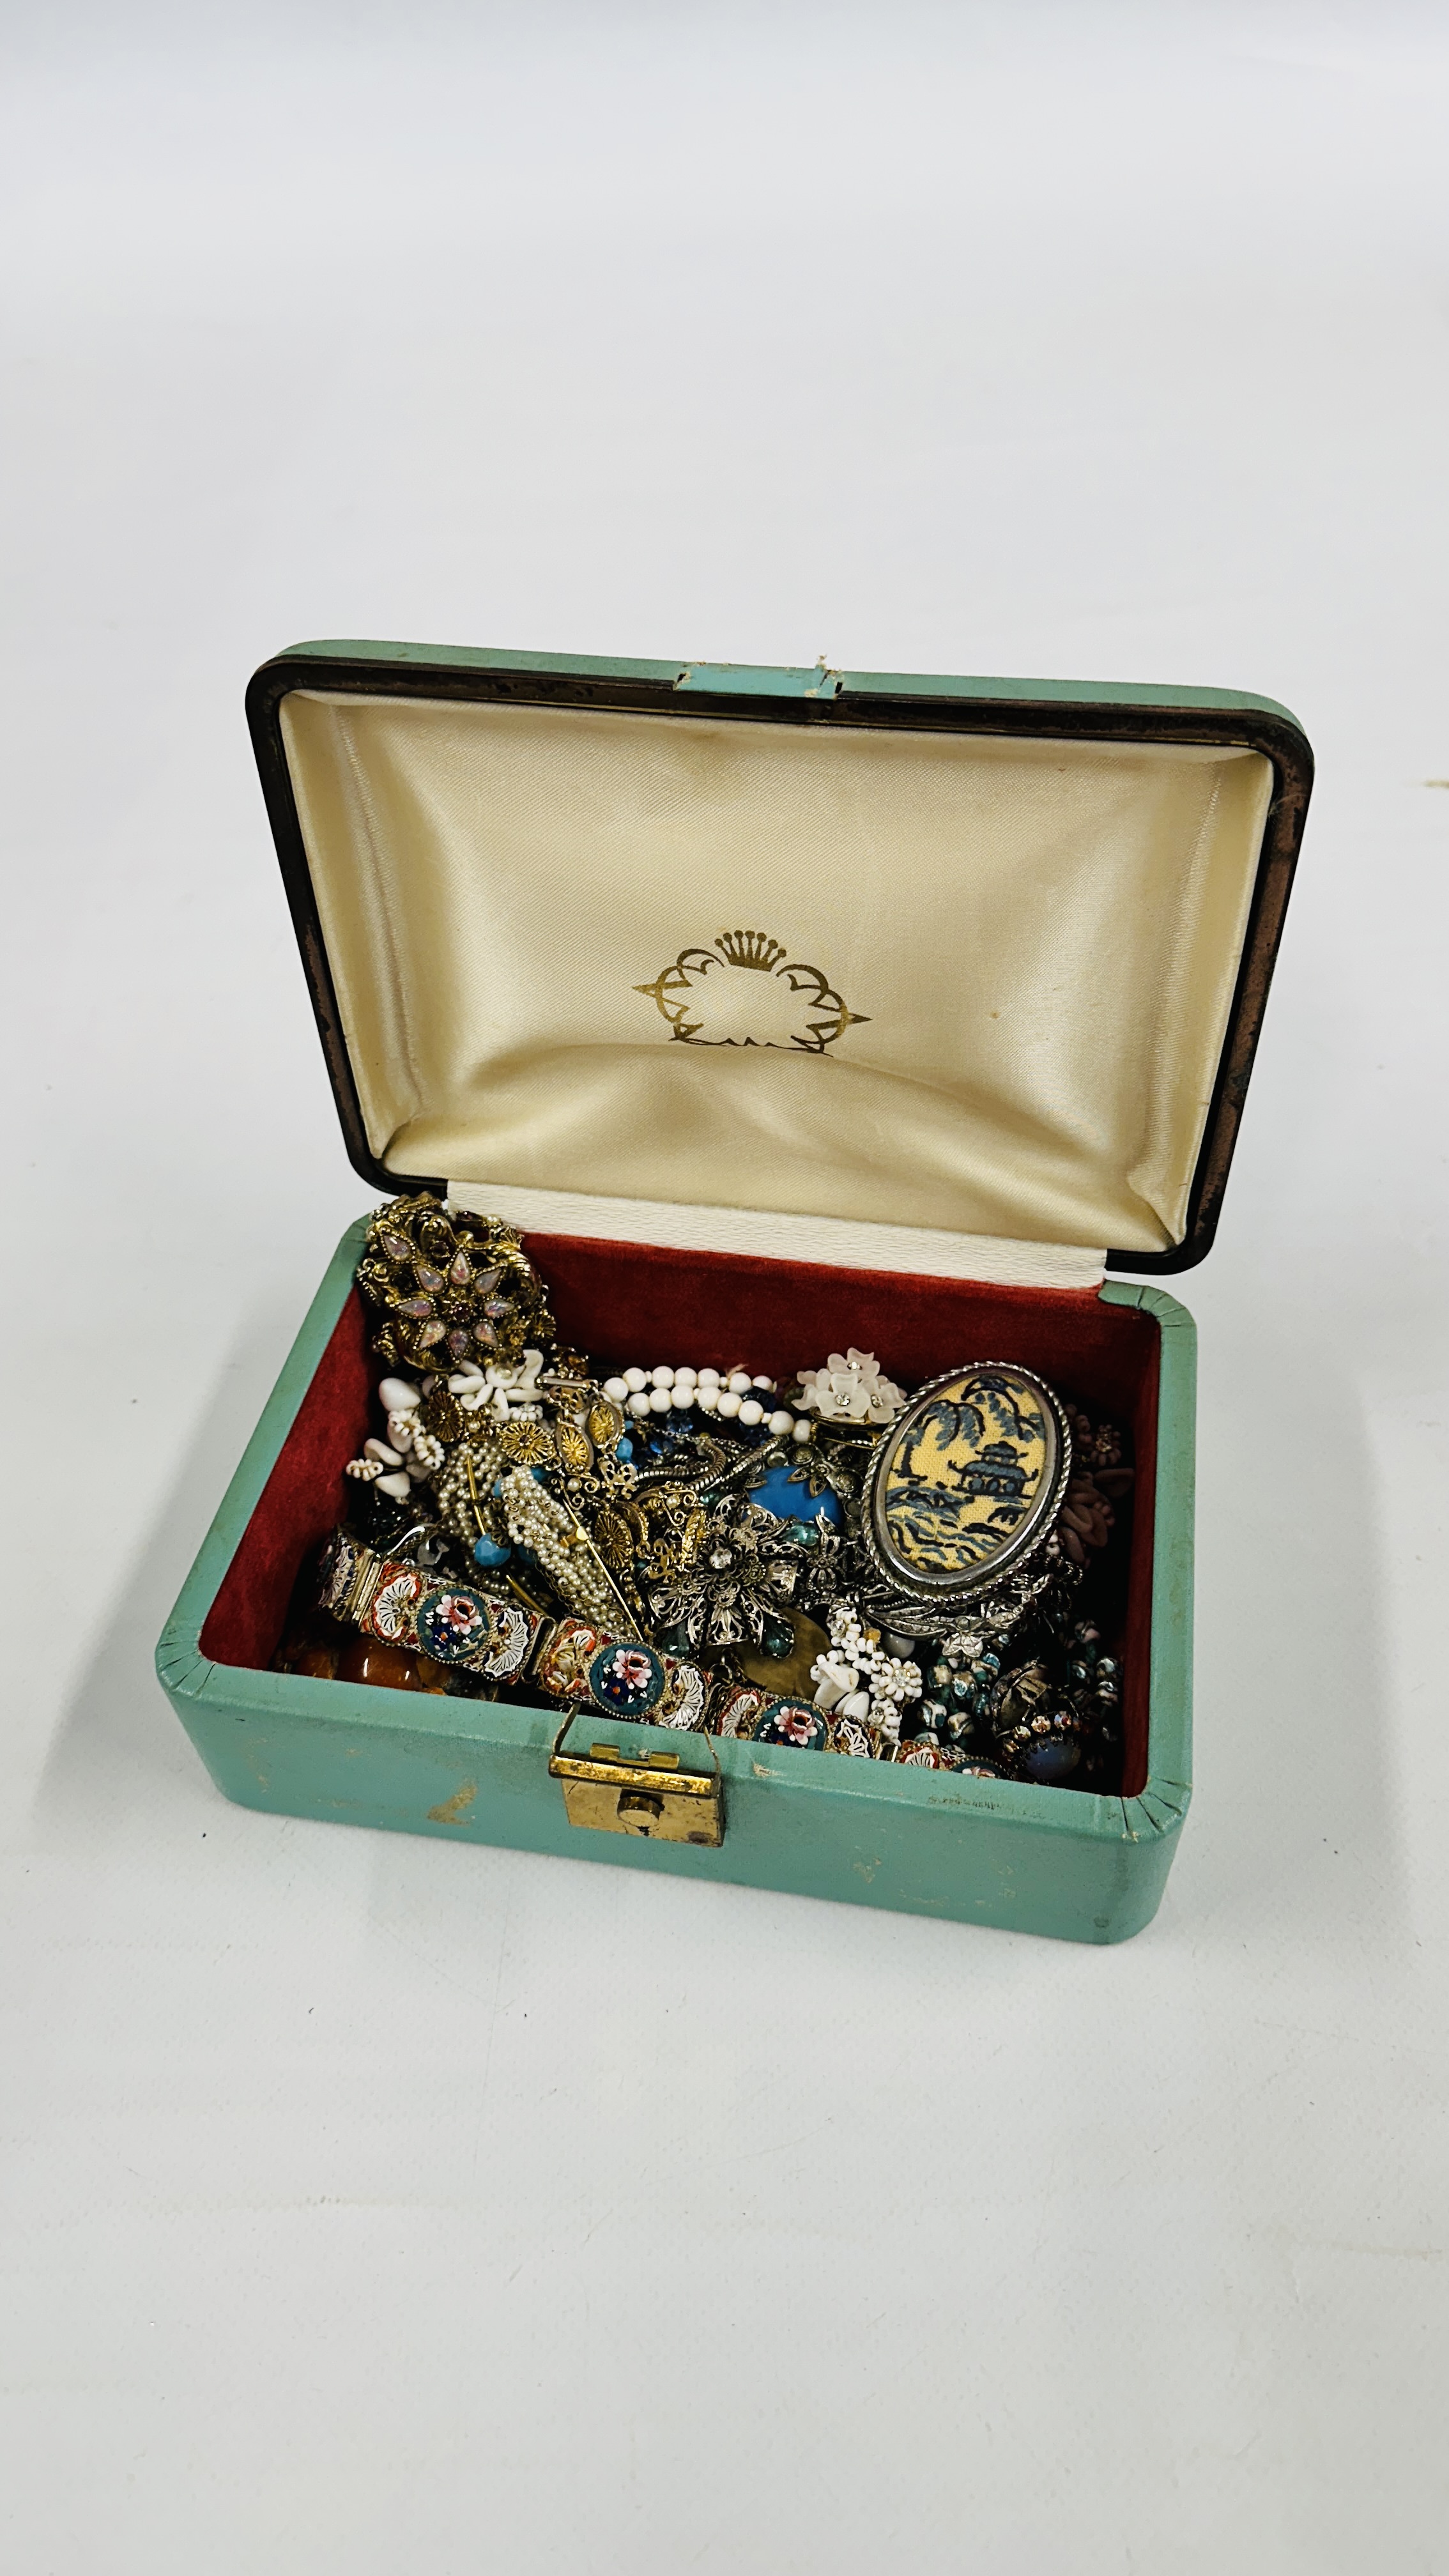 A VINTAGE JEWELLERY BOX WITH MOSAIC BRACELET, BROOCHES, NECKLACES AND A MARCASITE WATCH.